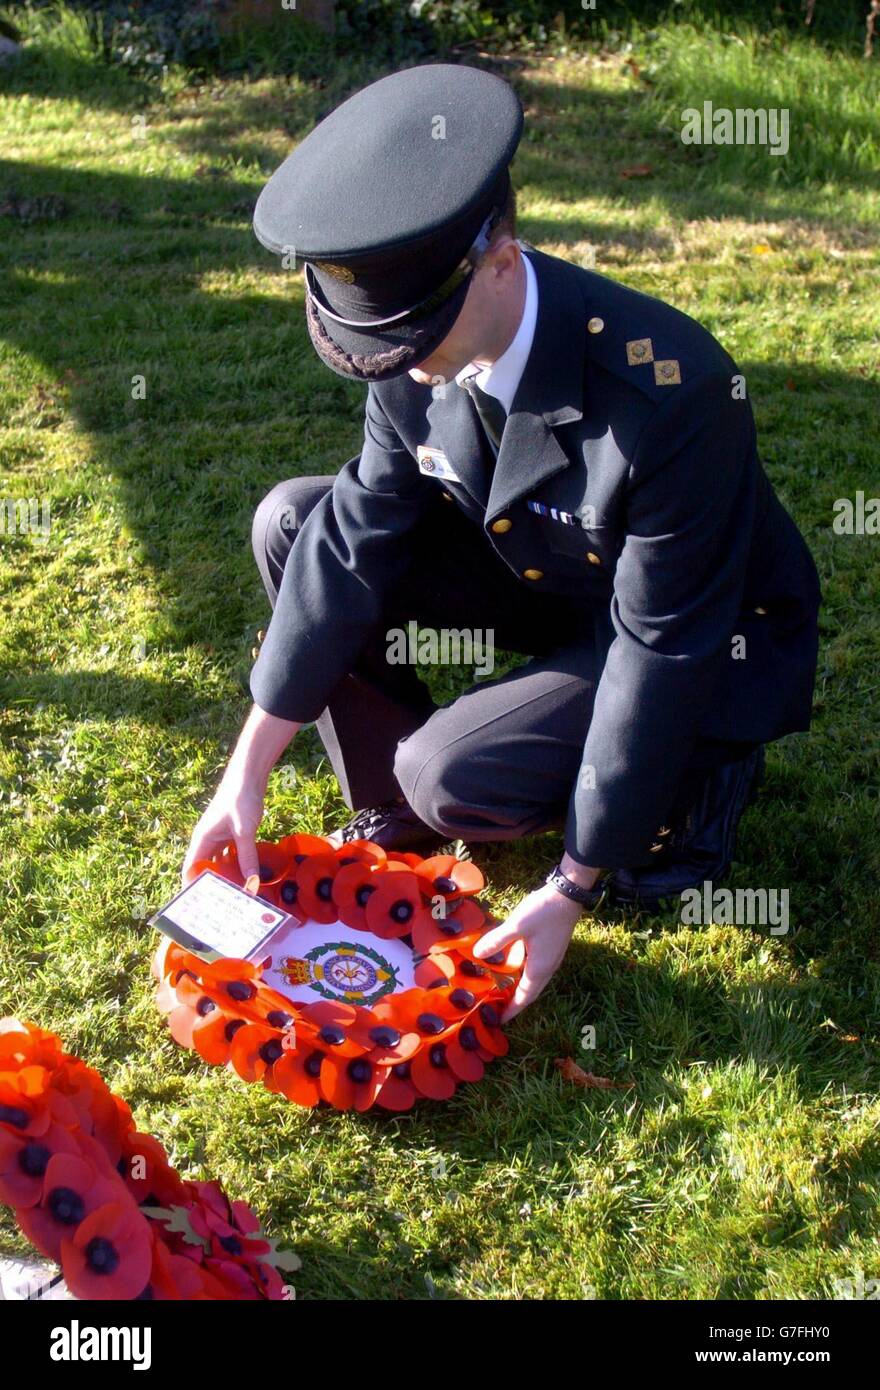 Stephen Hines, from the London Ambulance Service, lays a wreath in memory of the seven lives lost at the Ufton Nervet rail crash during a special service of remembrance held at St Mary's Church in Sulhamstead Abbots near Ufton Nervet in Berkshire. The Rememberance Sunday service honoured those lives lost at the Ufton Nervet rail crash which happened last Saturday. Stock Photo